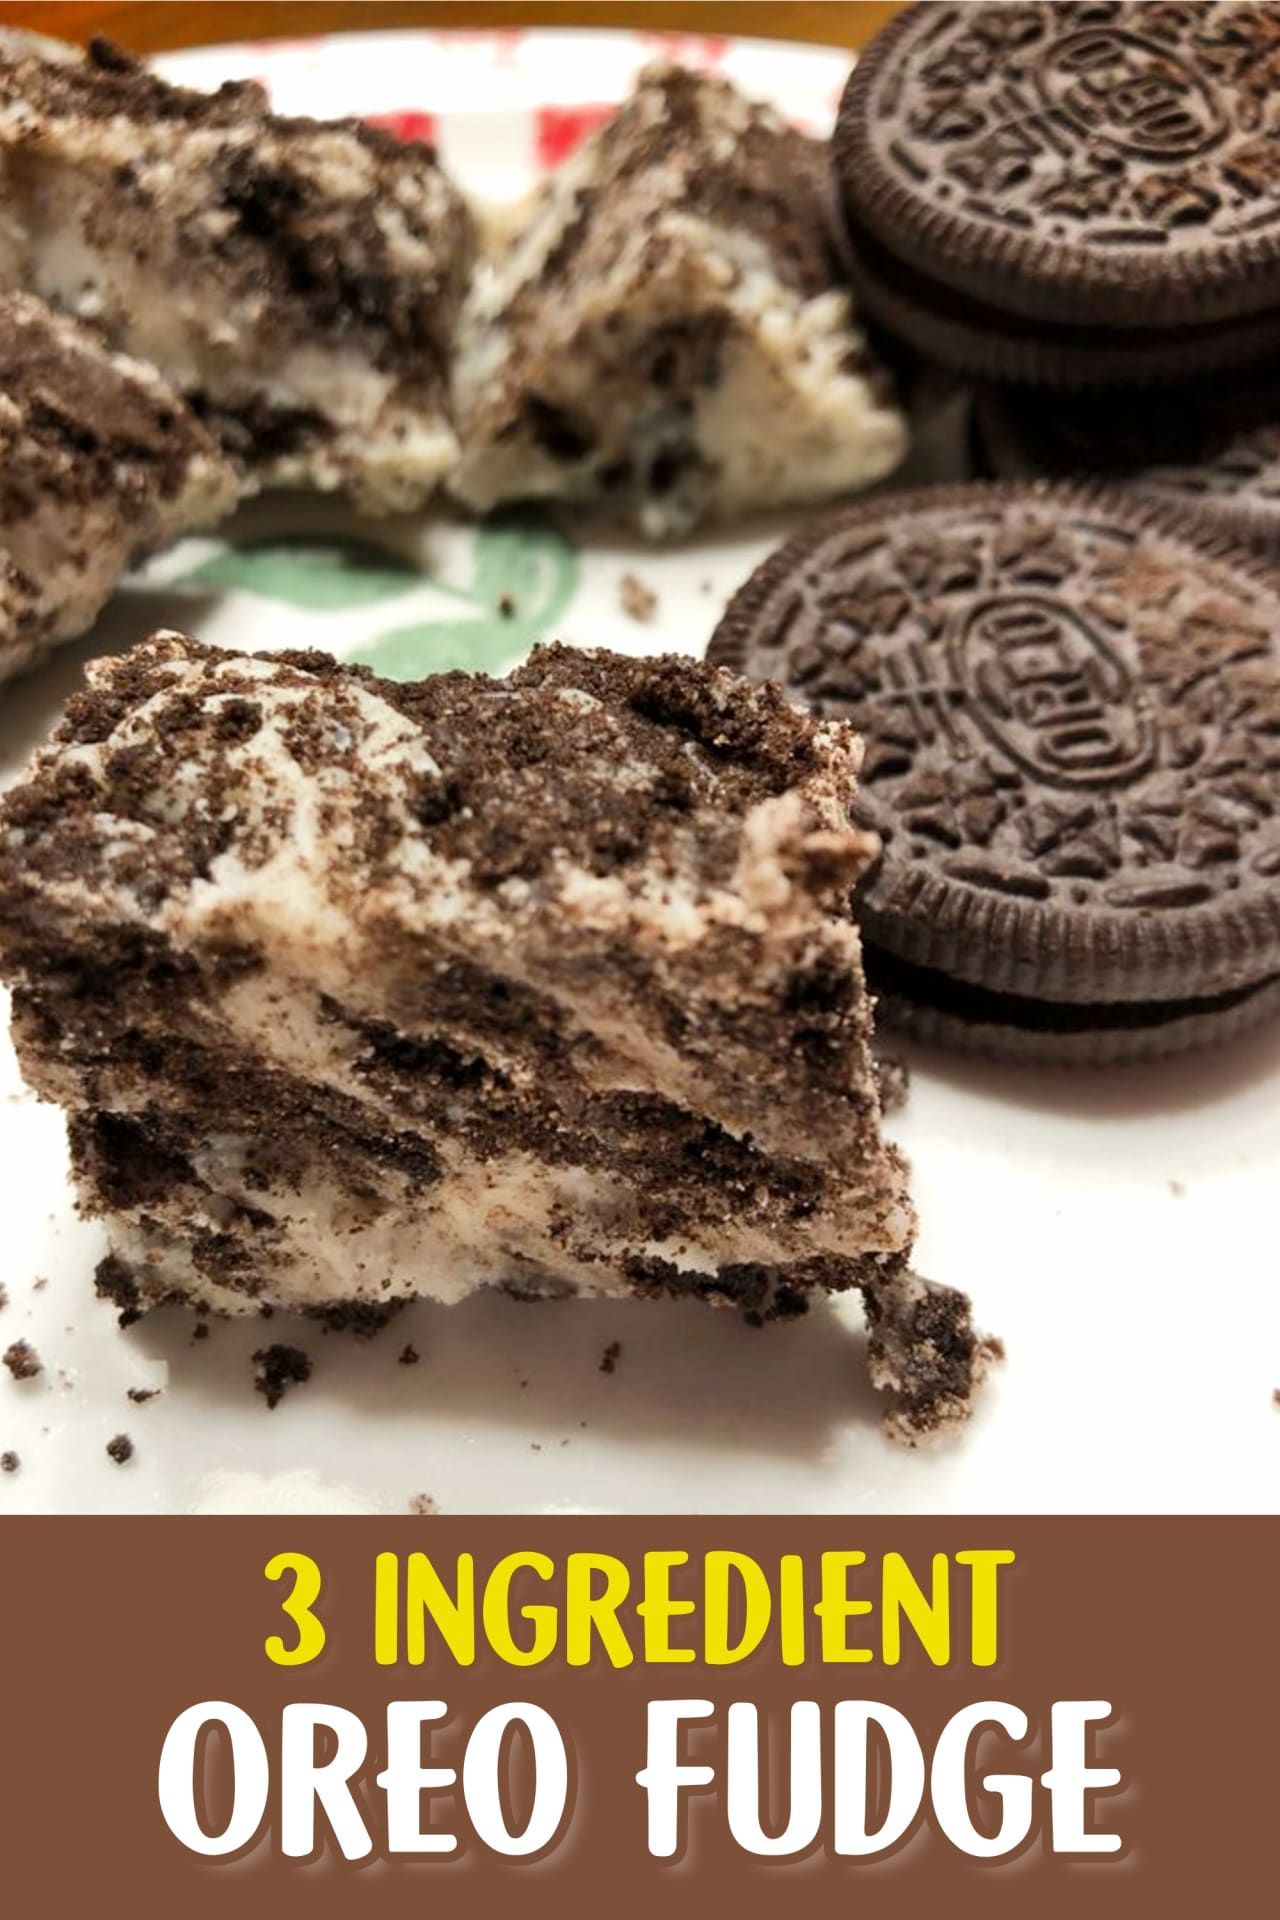 Fudge Recipes - Best Easy 3 Ingredient Fudge Recipes - Quick Sweet Treats for Any Holiday Party Crowd -   18 desserts Oreo 3 ingredients ideas